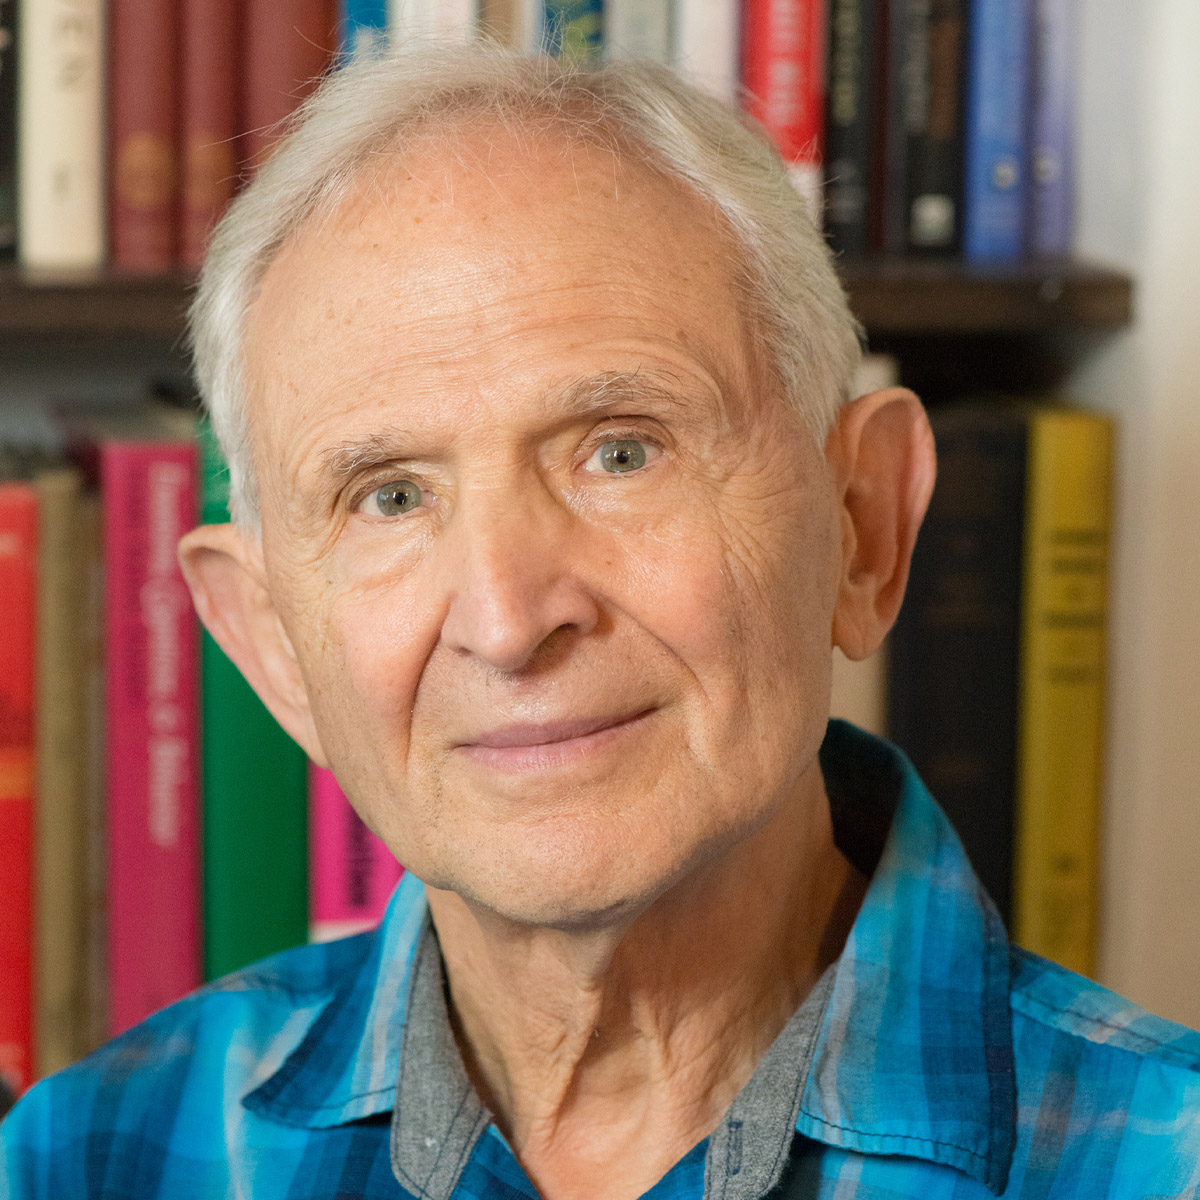 Peter Levine color portrait. Peter Levine is an older, white man posed in front of bookshelves lined with books. He is smiling and wearing a brightly-colored plaid button-down.